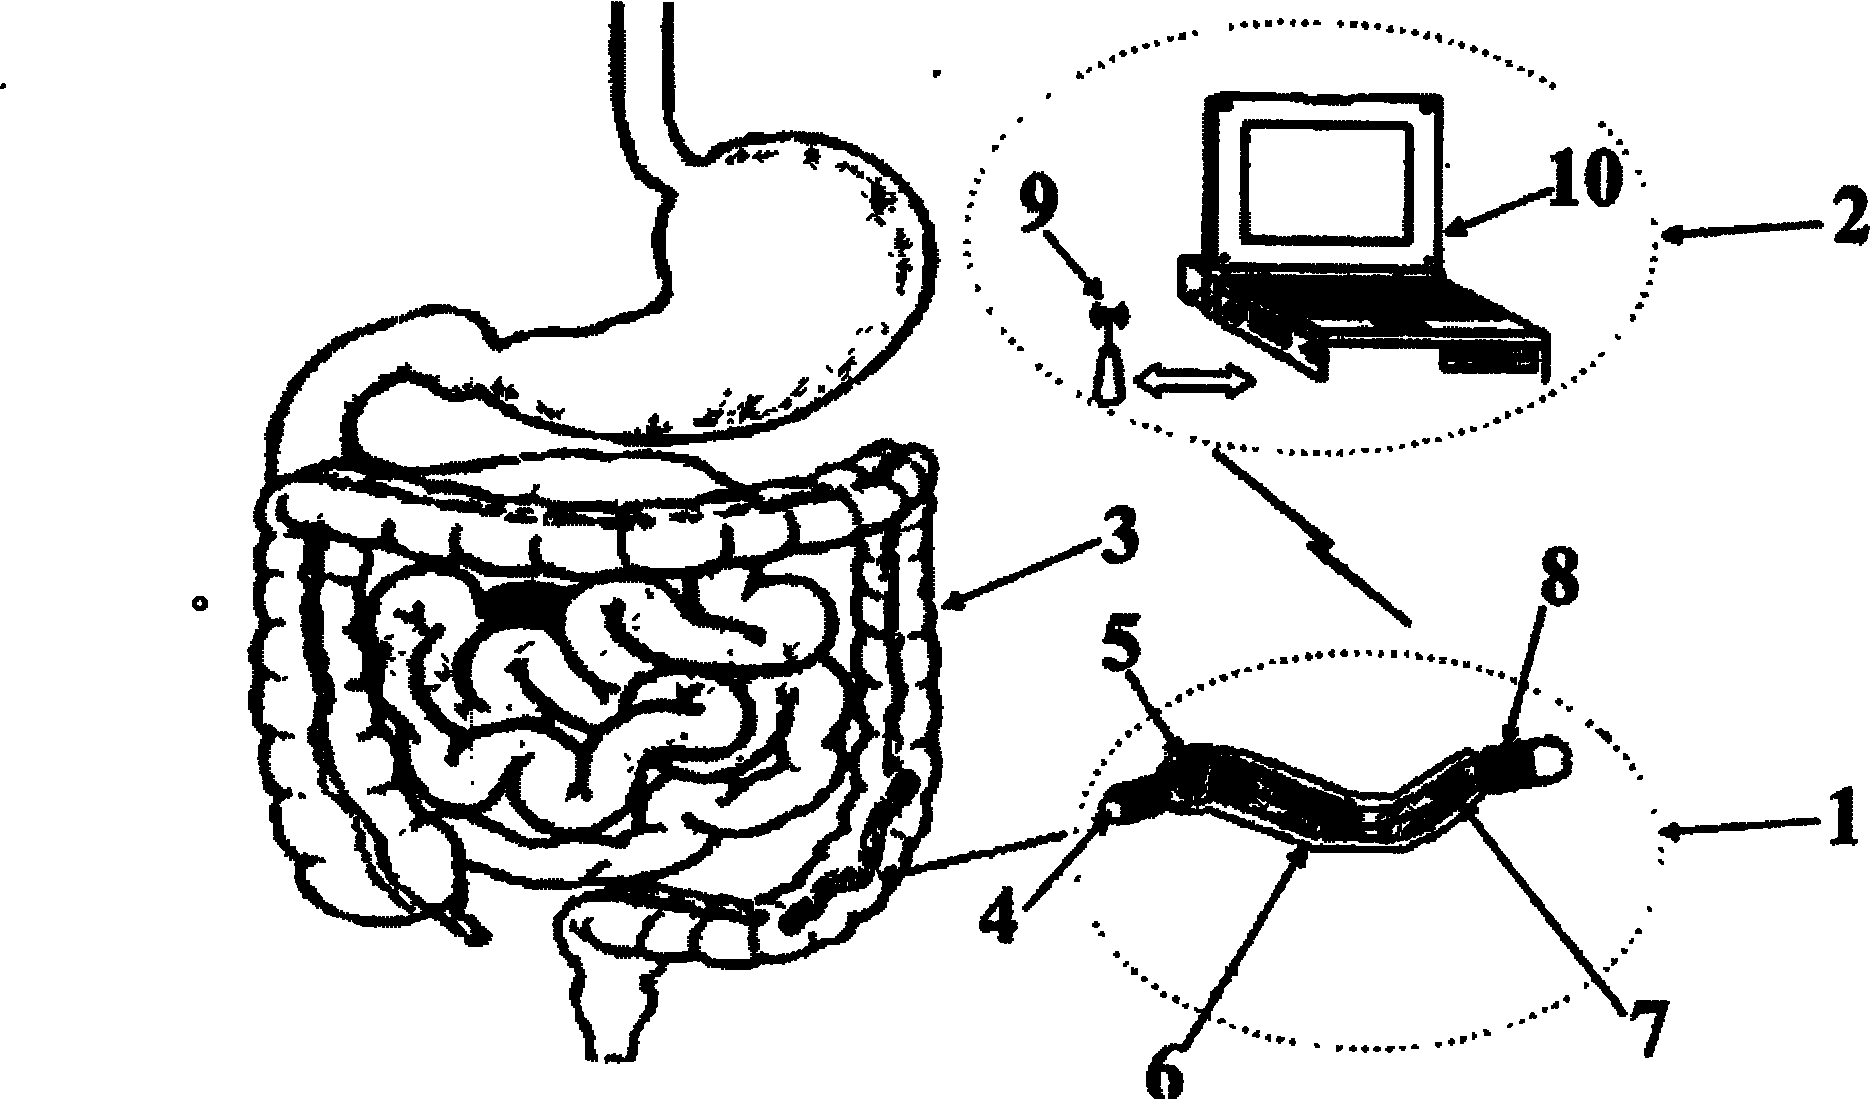 Intestinal tract diagnosis and treatment robot system